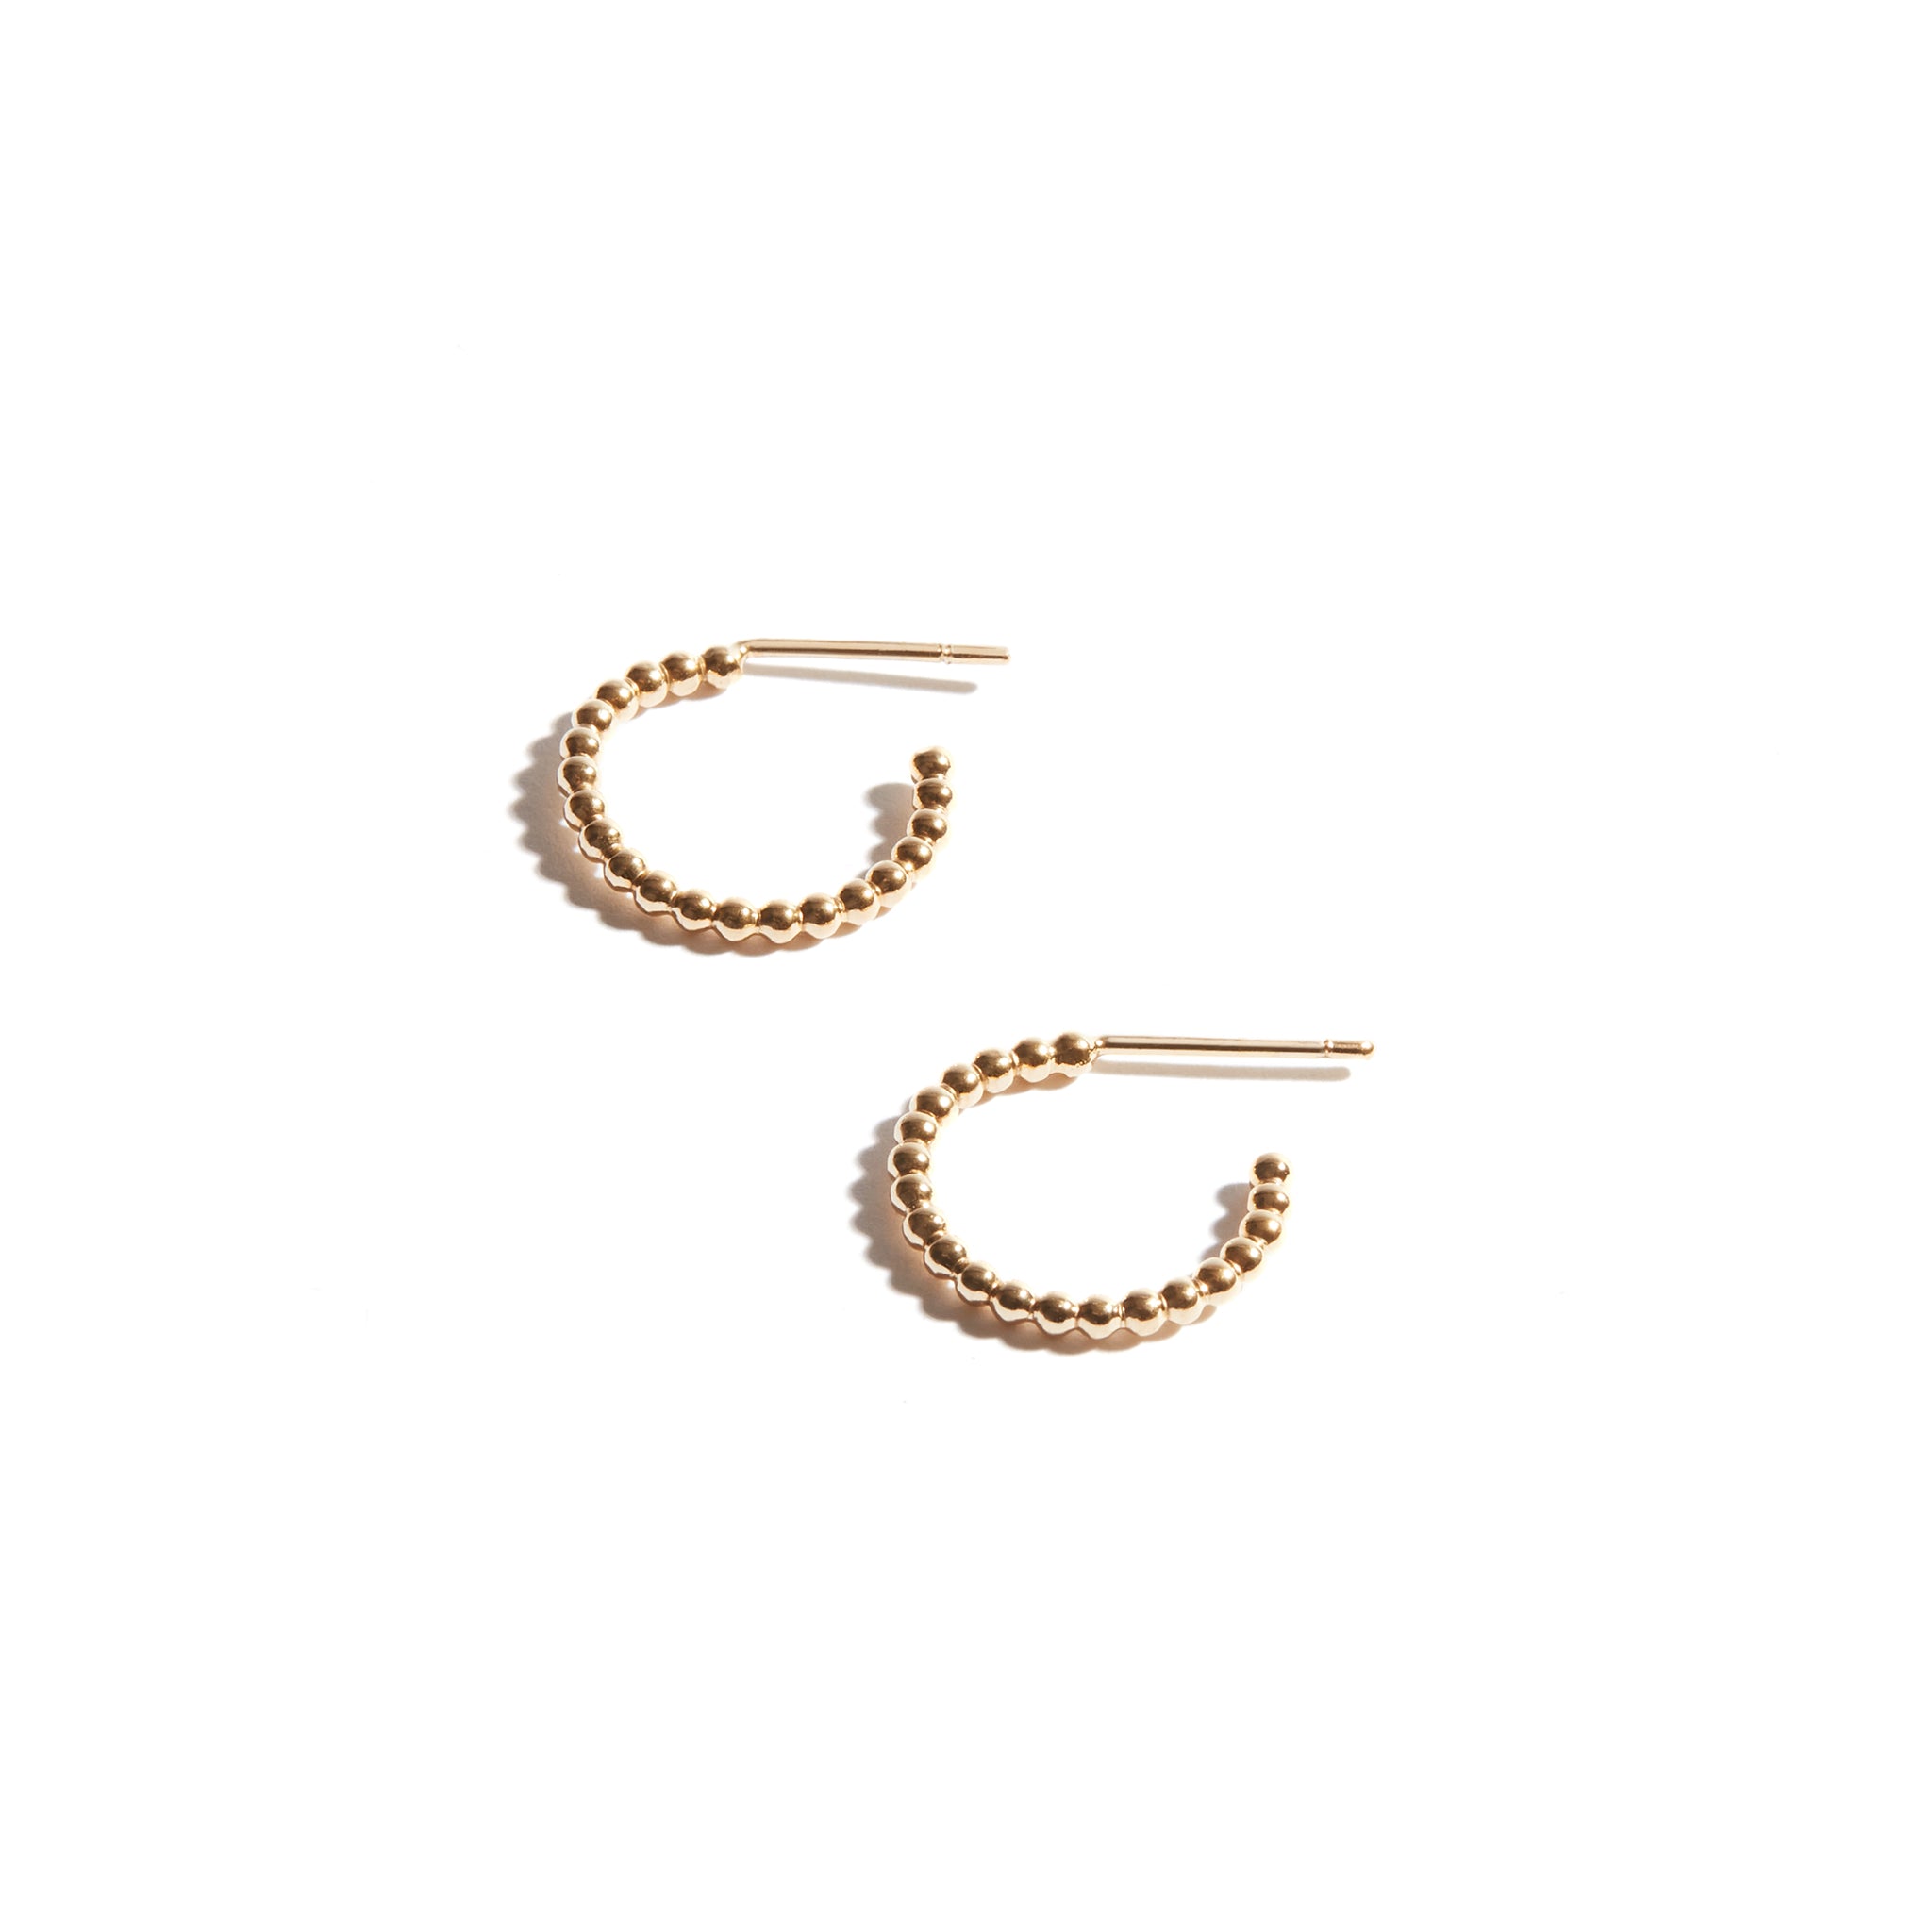 Stylish 1.5 cm Small Bubble Hoop Earrings made from 14ct gold fill, featuring a textured design with small bubbles, perfect for adding a touch of charm to any outfit.